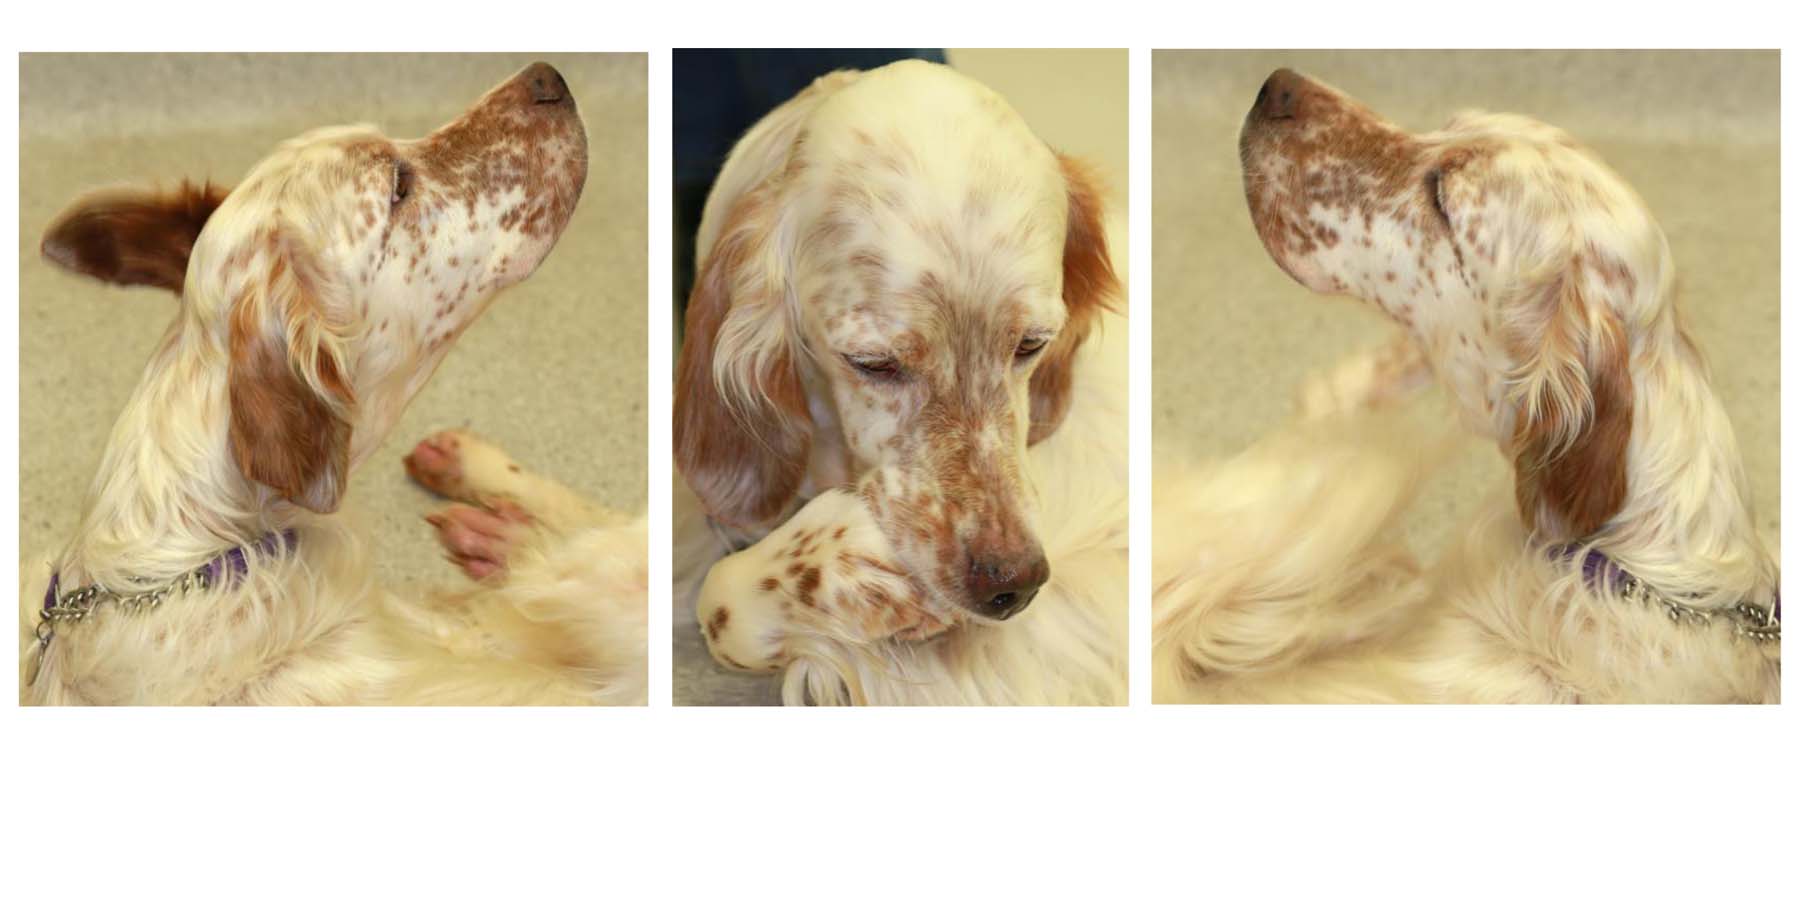 Canine Atopic Dermatitis: head shaking, paw chewing & face scratching, English Setter